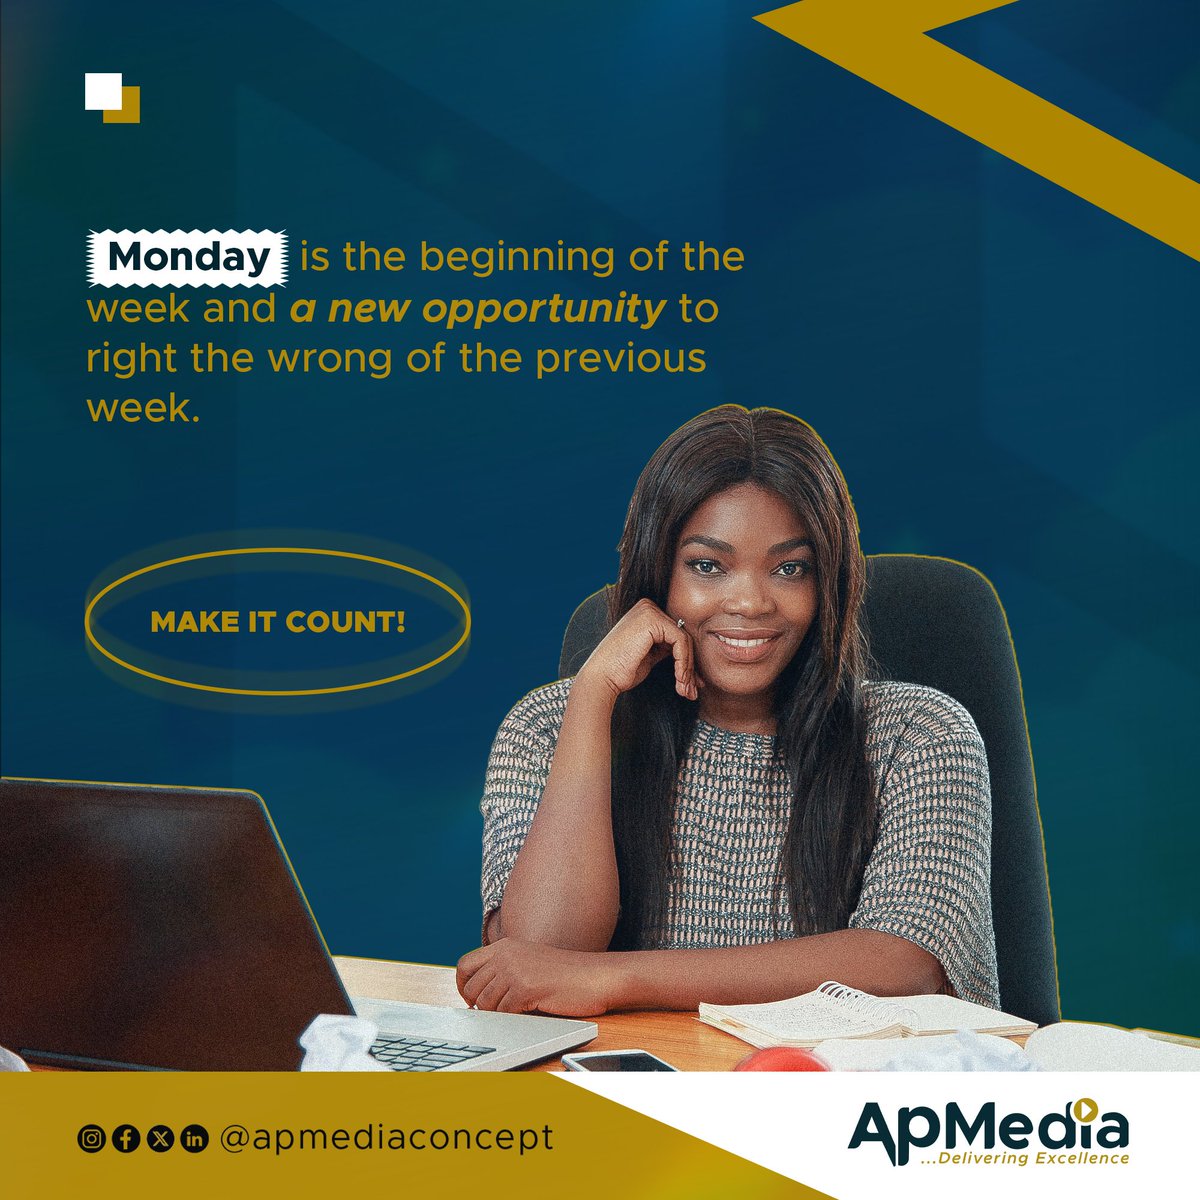 Happy New Week Family...
It's Monday, make every attempt to right the wrongs of last week and decide to diligently work at it.

Cheers!

#apmedia #apmediaconcept #mondaymotivation #monday #design #creativearts #adobe #adobephotoshop #viral #viralpost